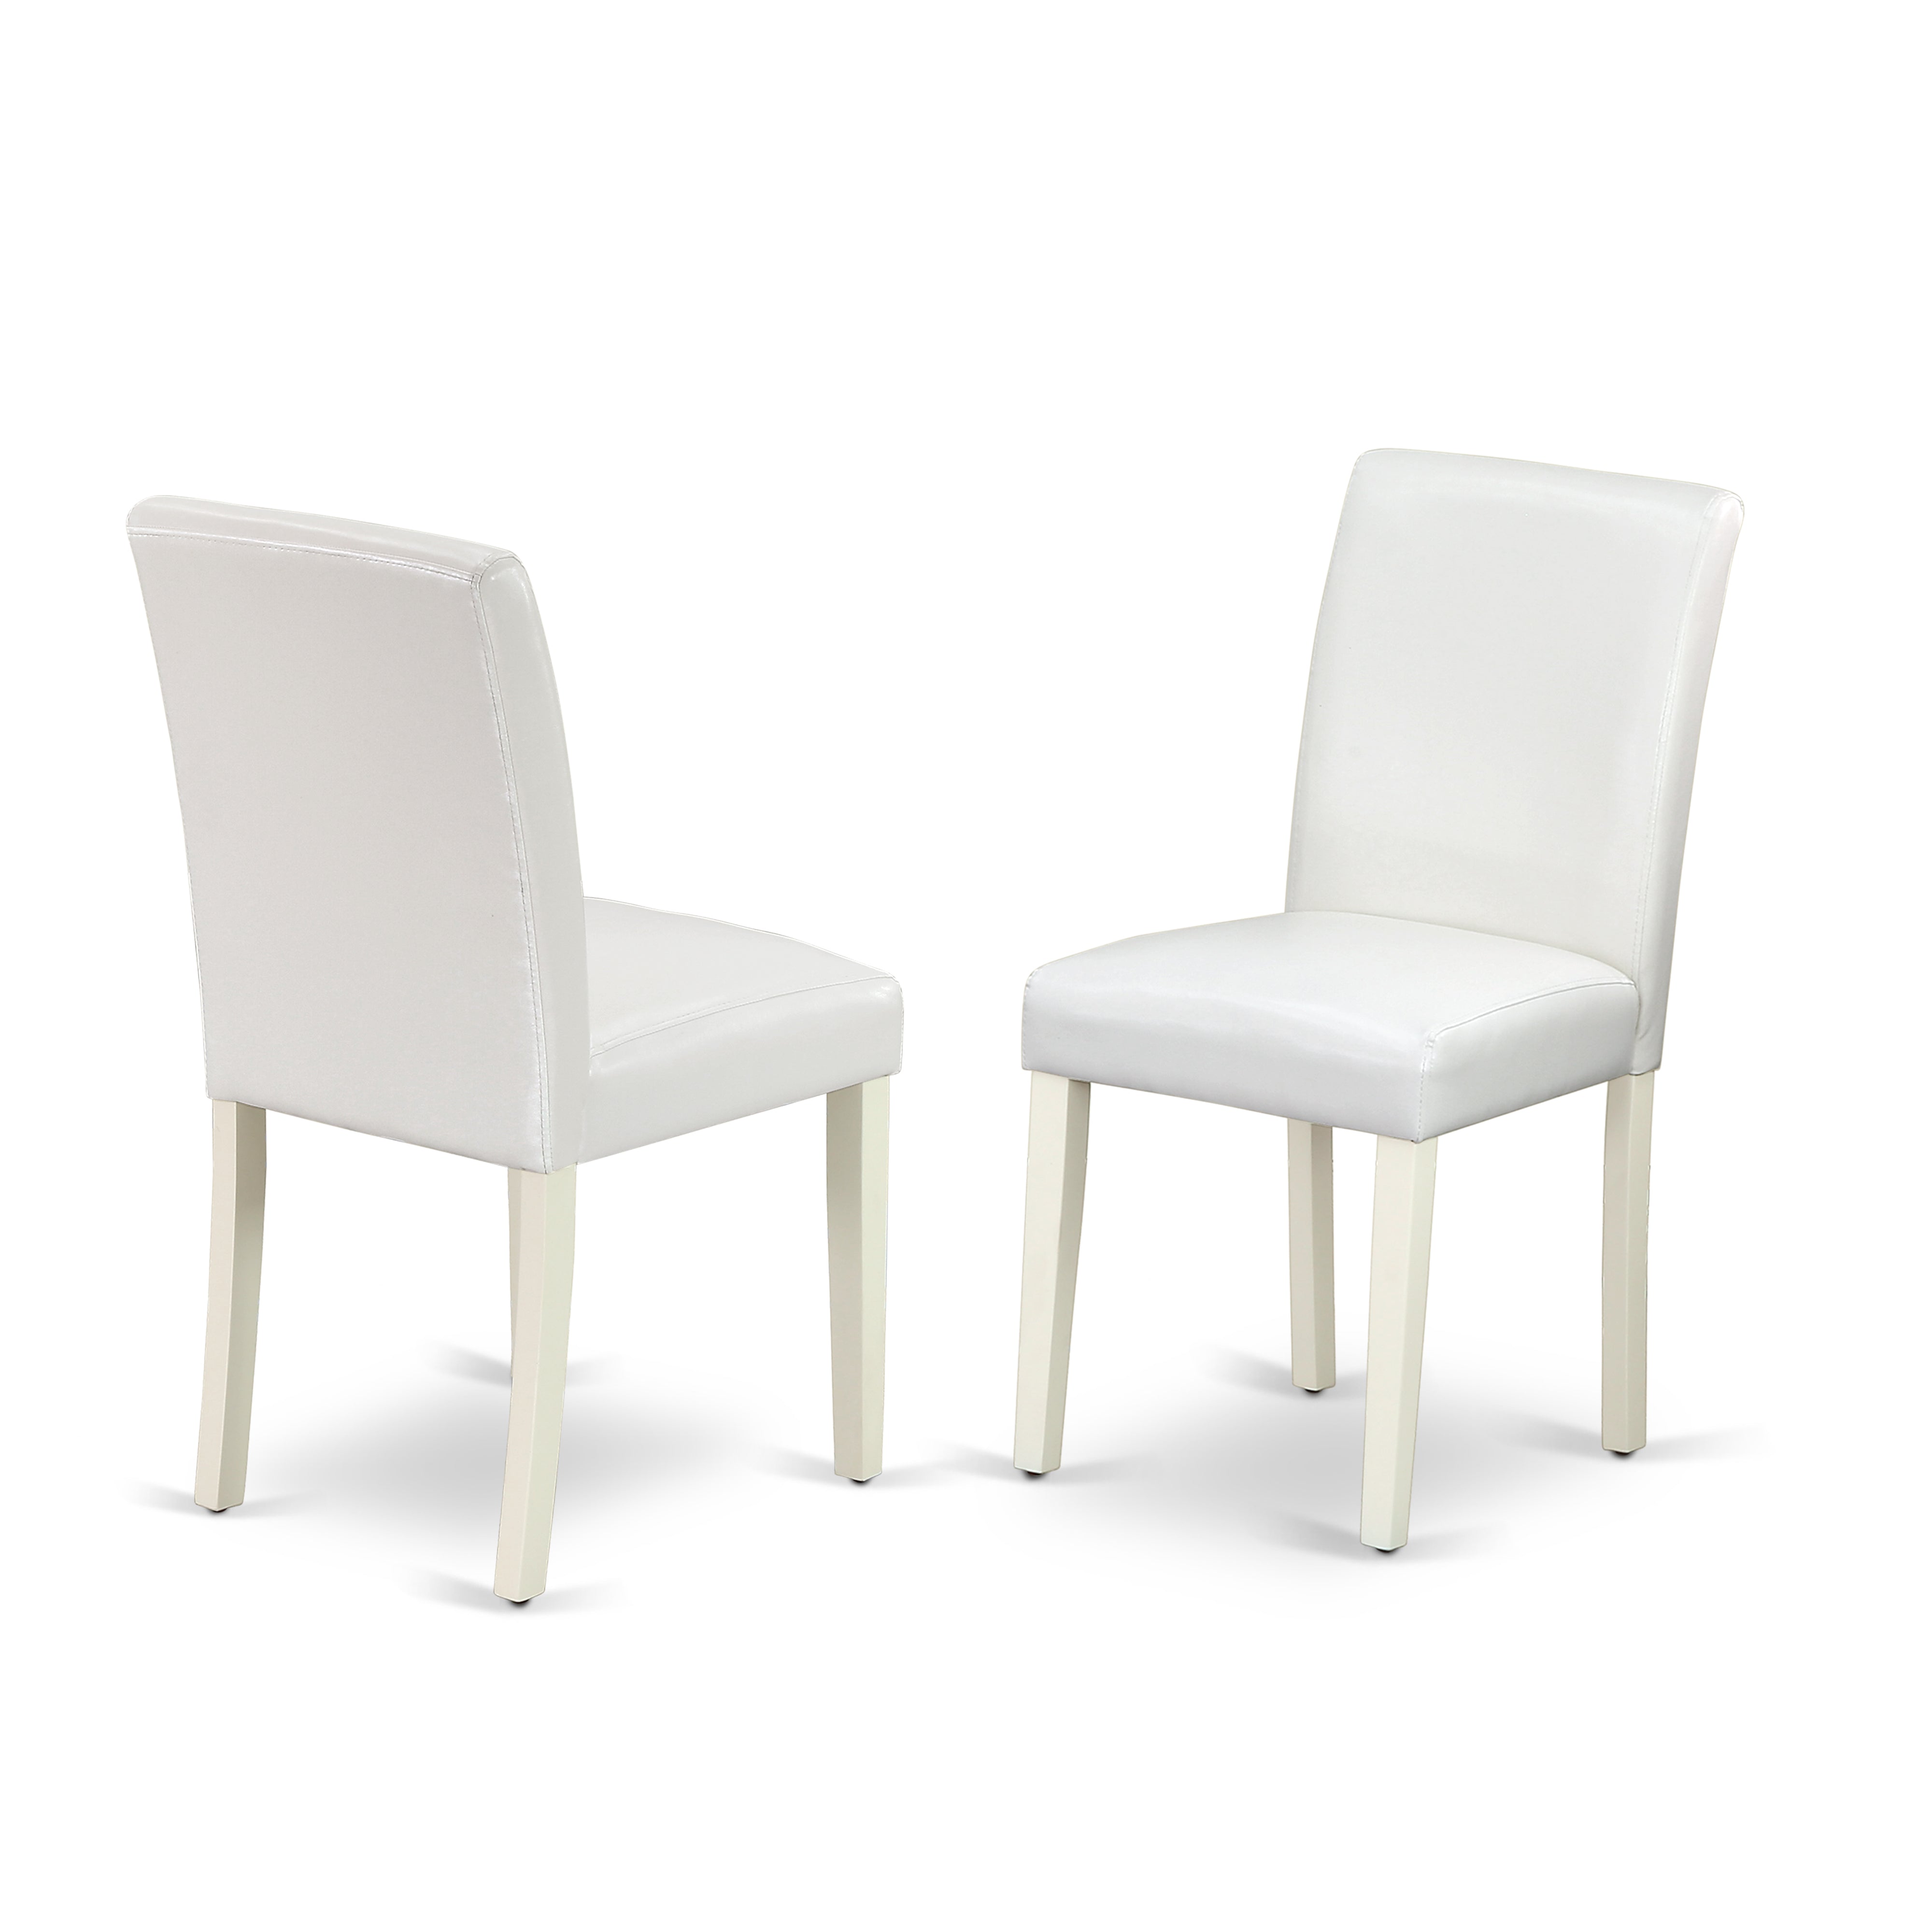 BOAB3-LWH-64 3Pc Round 42" Table And Two Parson Chair With Linen White Leg And Pu Leather Color White